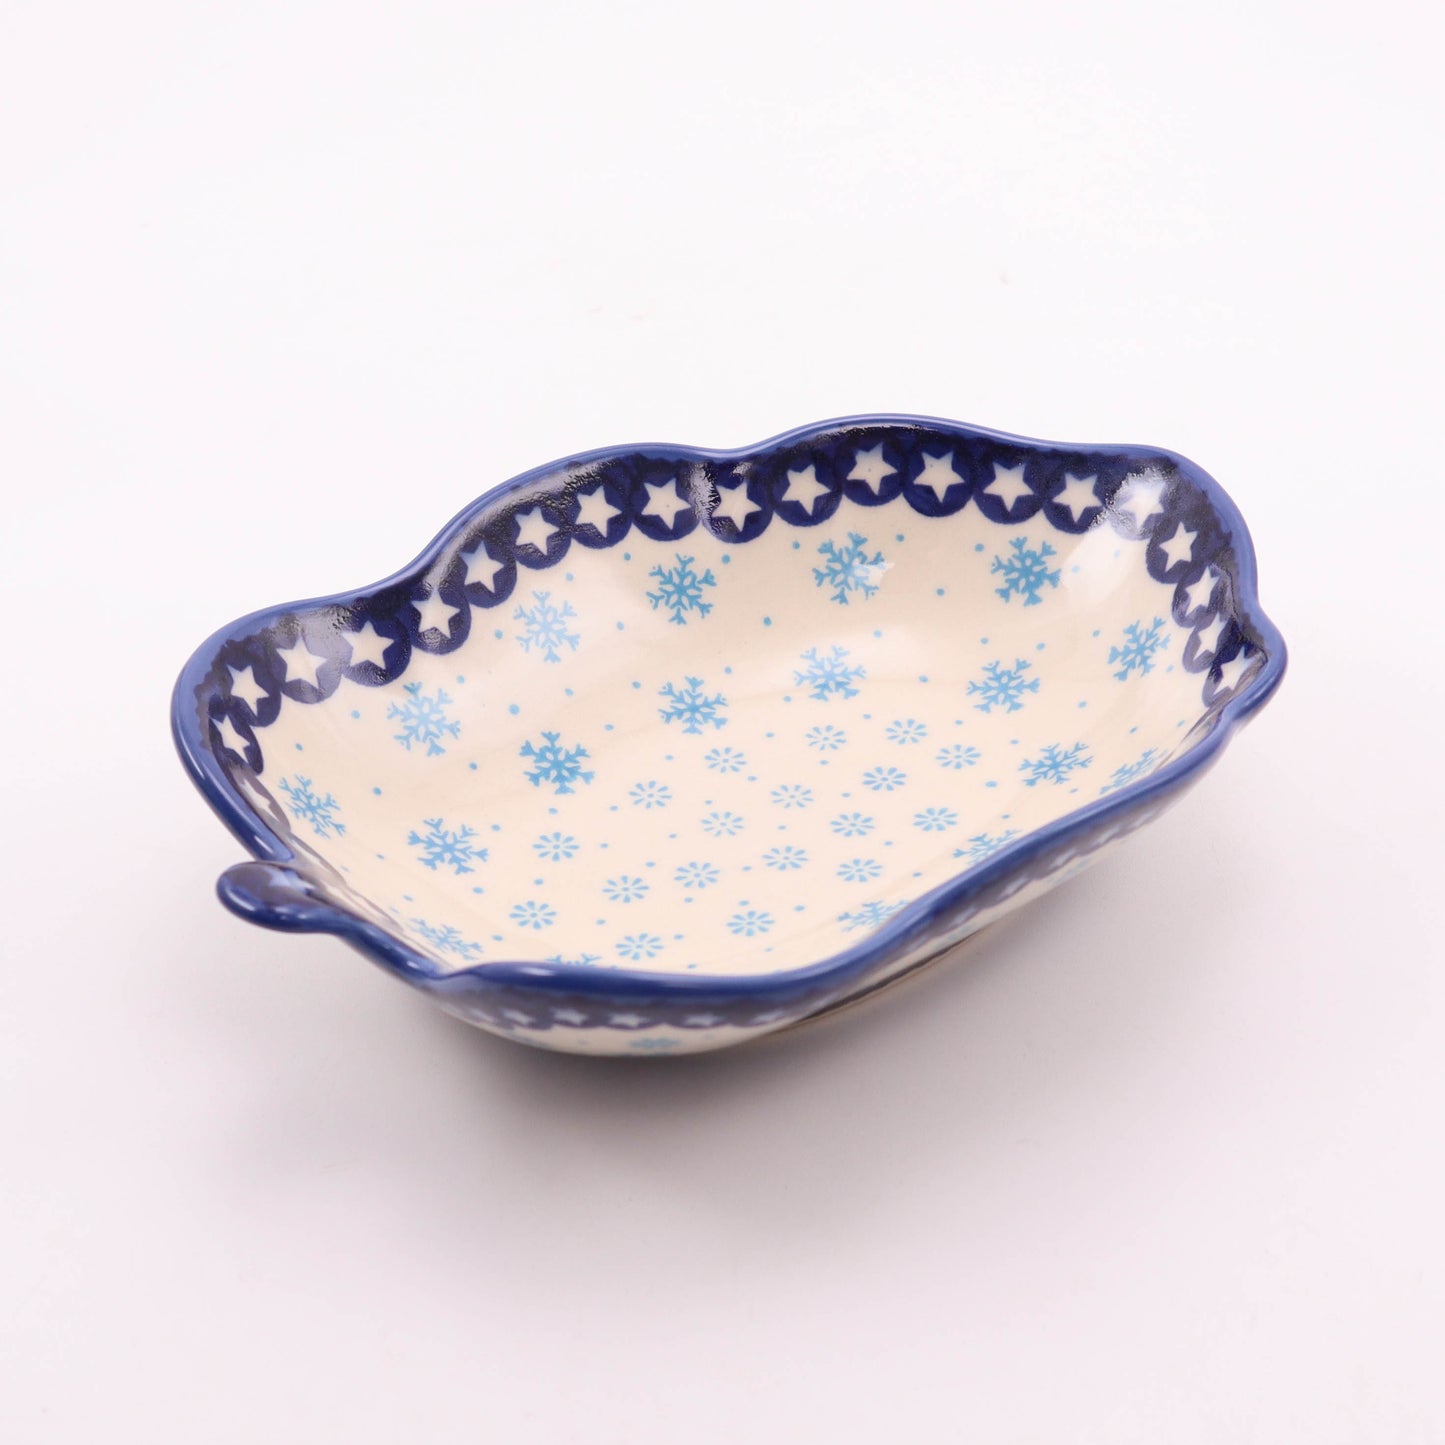 7"x5.5" Leaf Bowl. Pattern: Frosted Flakes